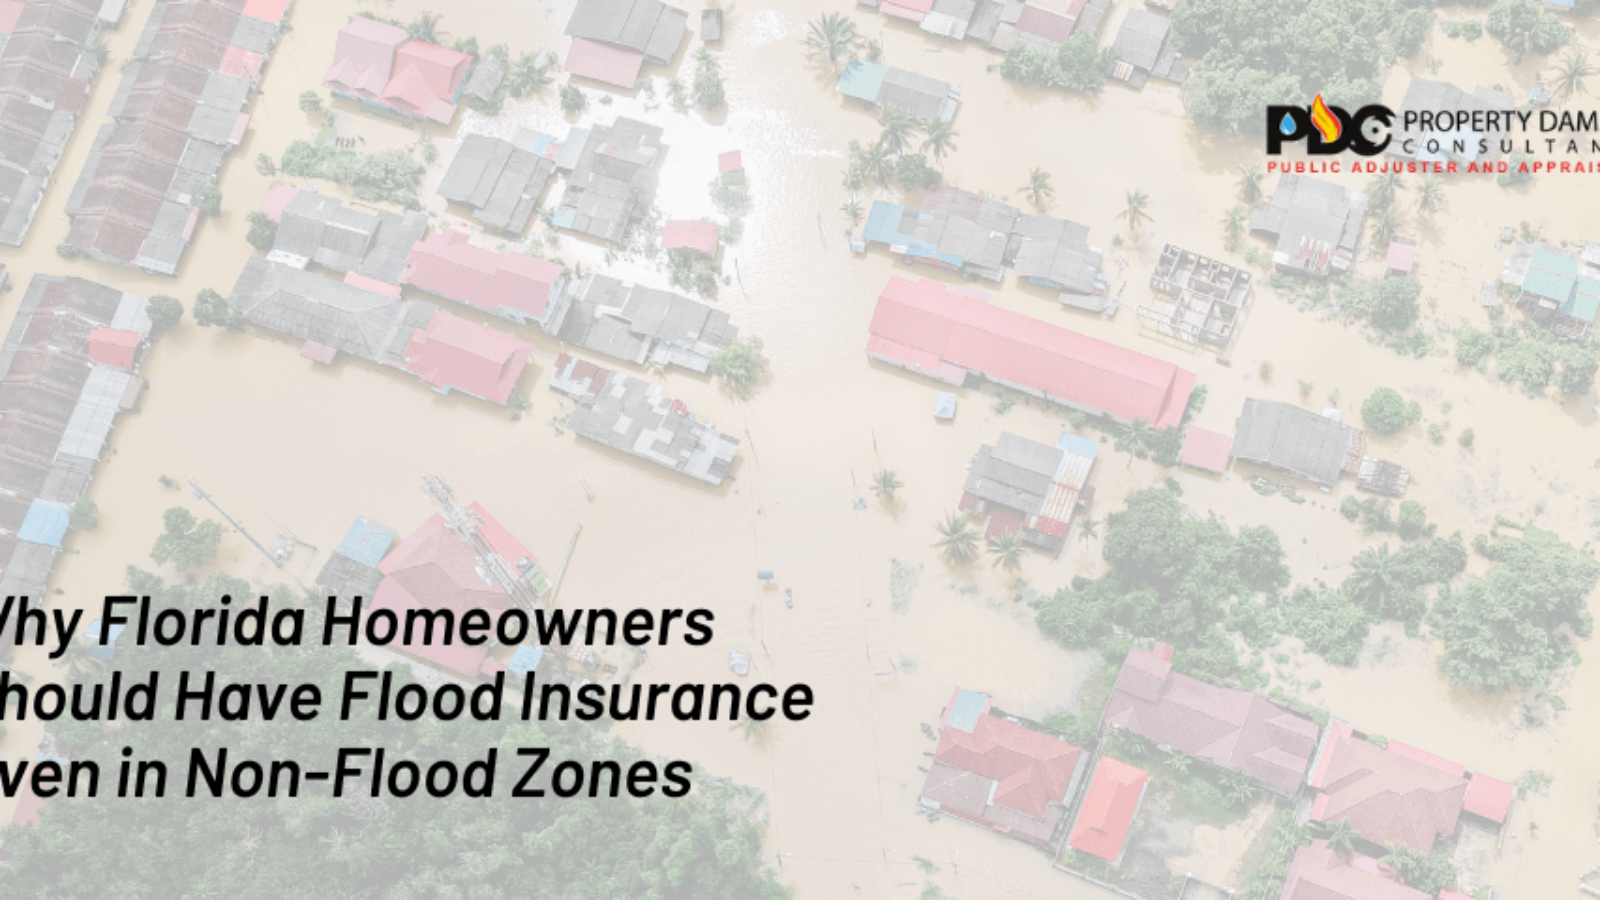 Why-Florida-Homeowners-Should-Have-Flood-Insurance-Even-in-Non-Flood-Zones--960x480